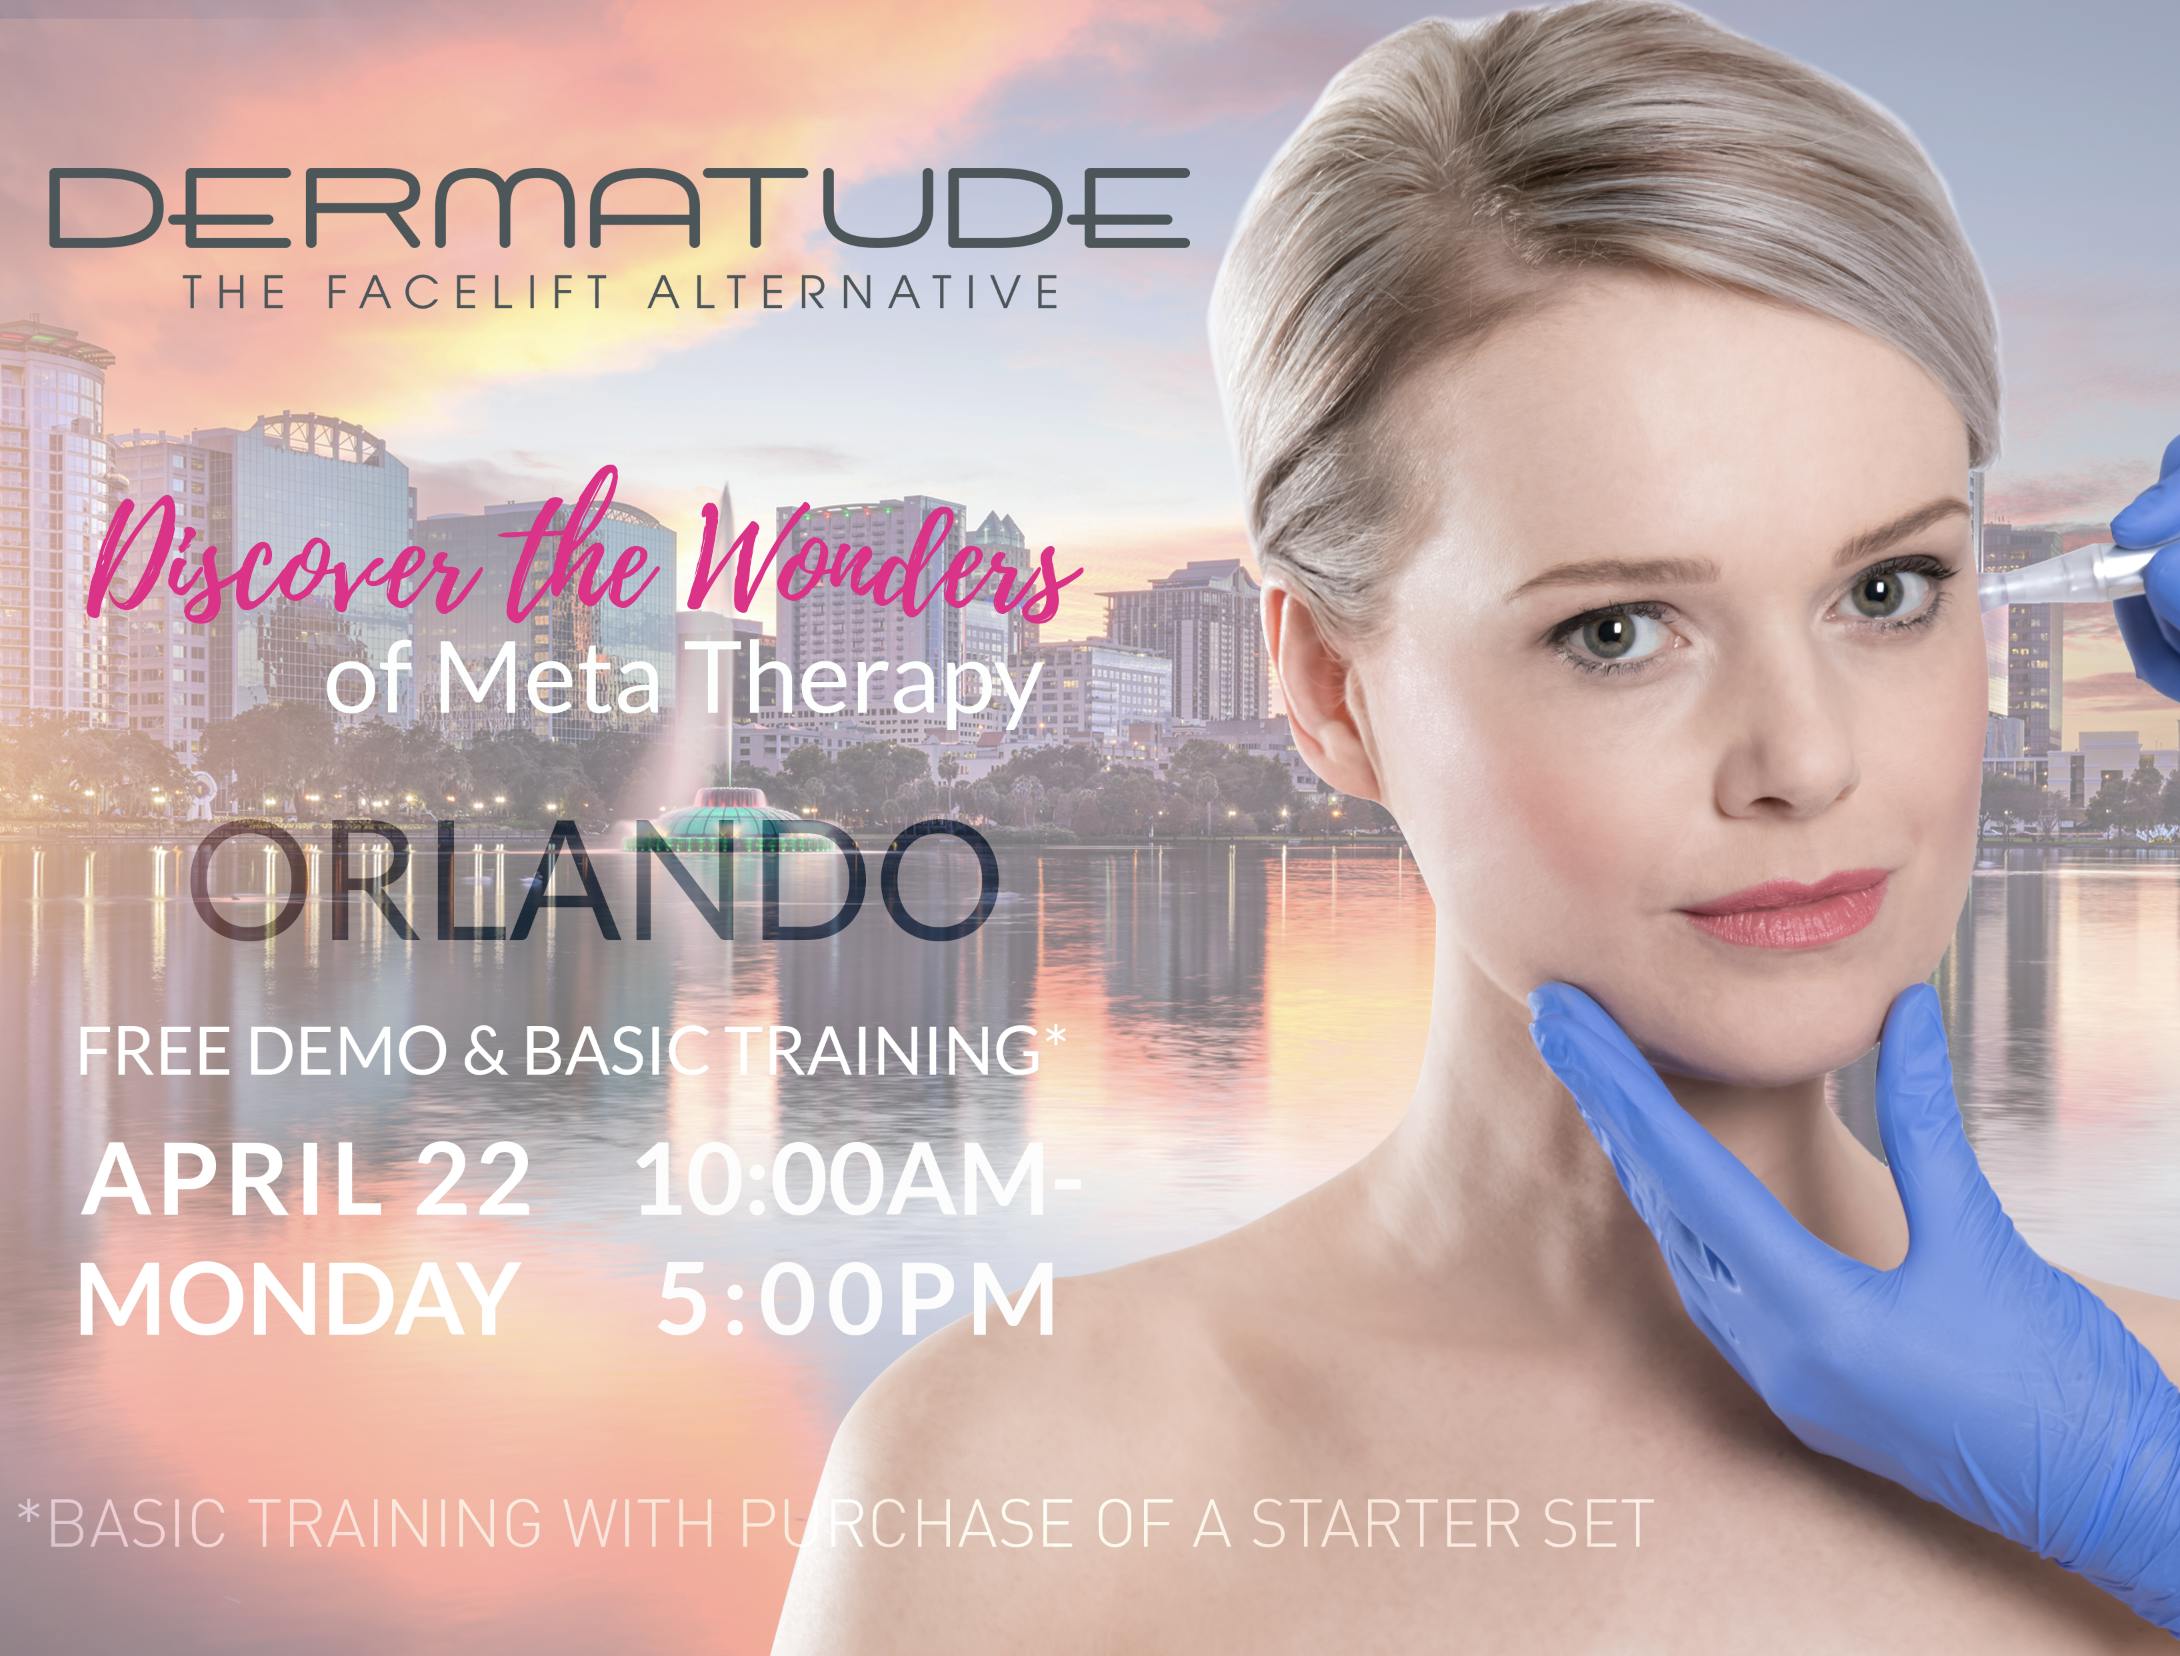 Discover Dermatude: The Facelift Alternative to Fillers and Surgery